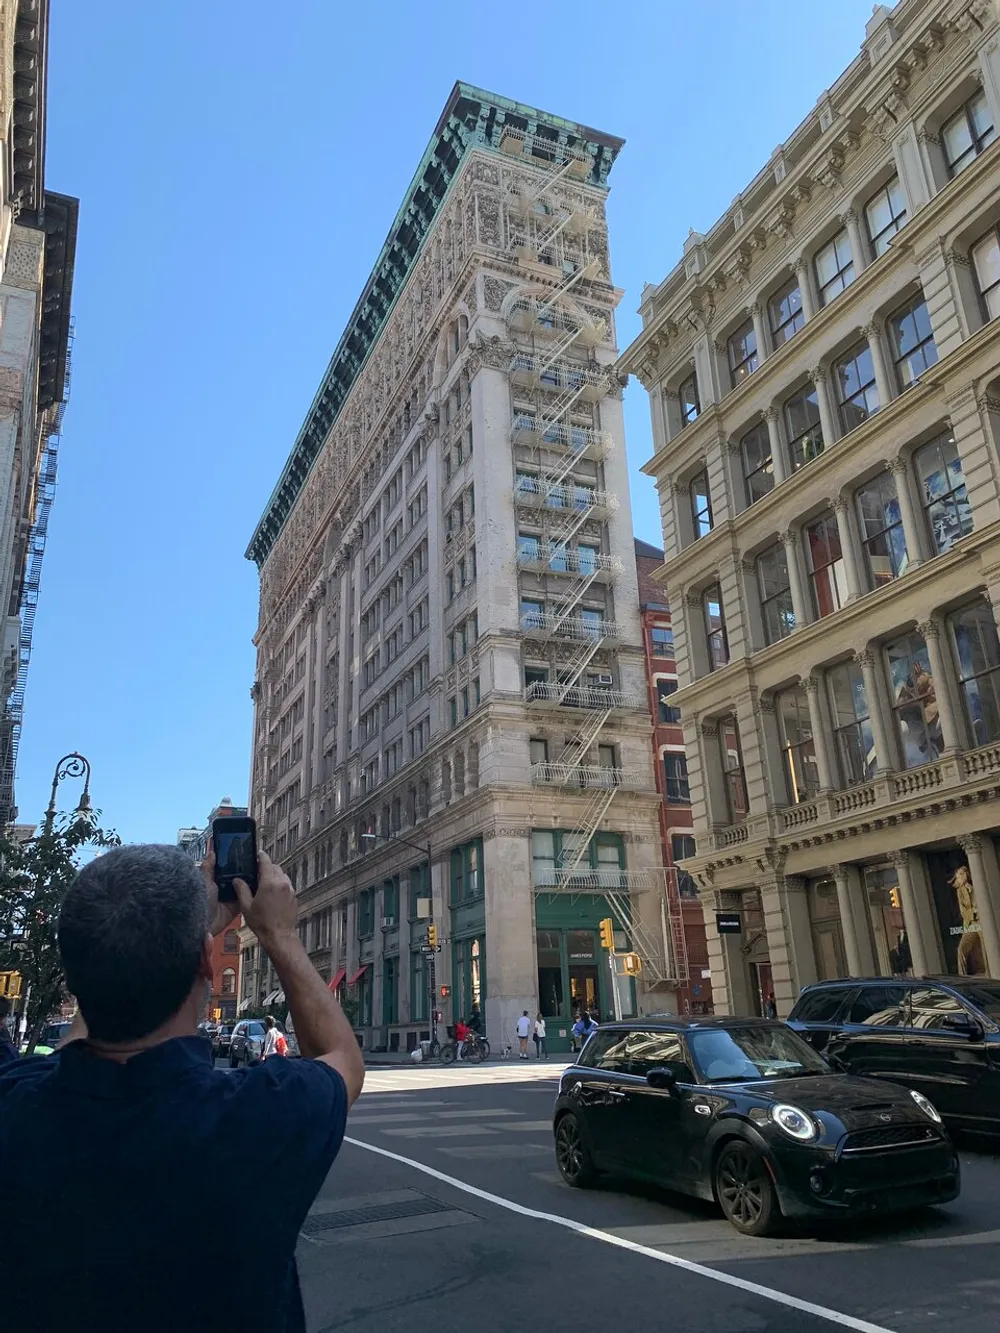 A person is taking a photo of a distinctive flatiron-style building on a sunny day in a bustling city street